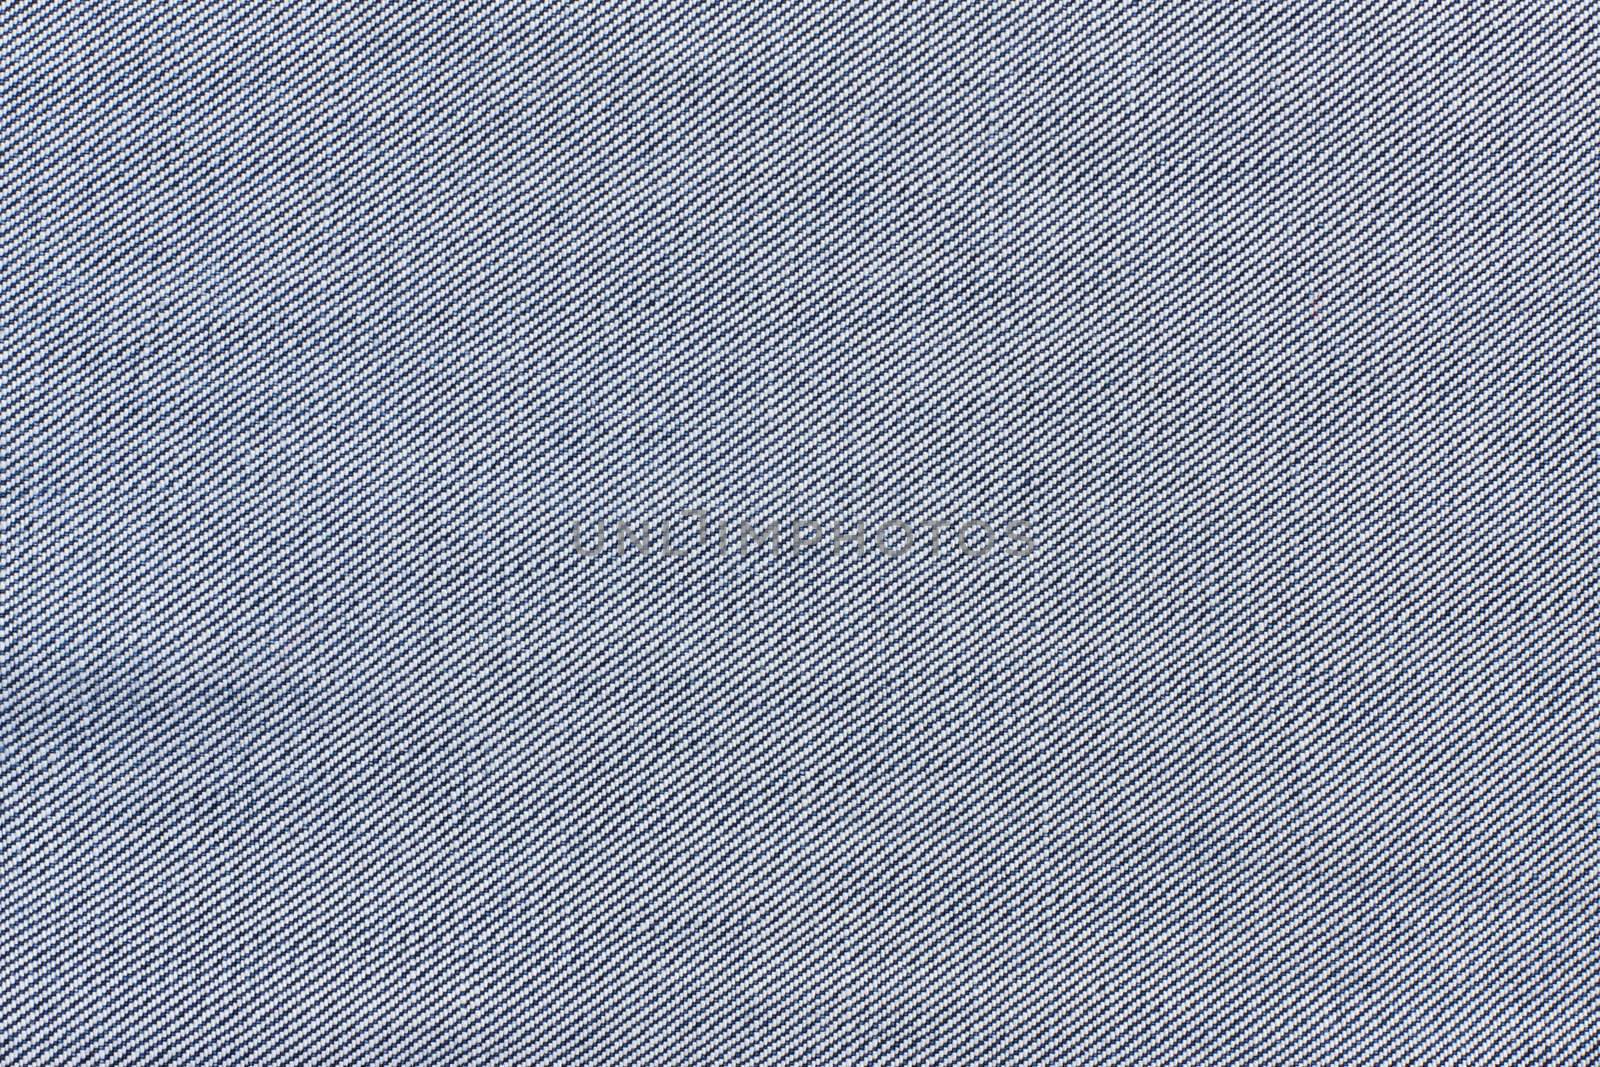 texture of blue jeans close-up